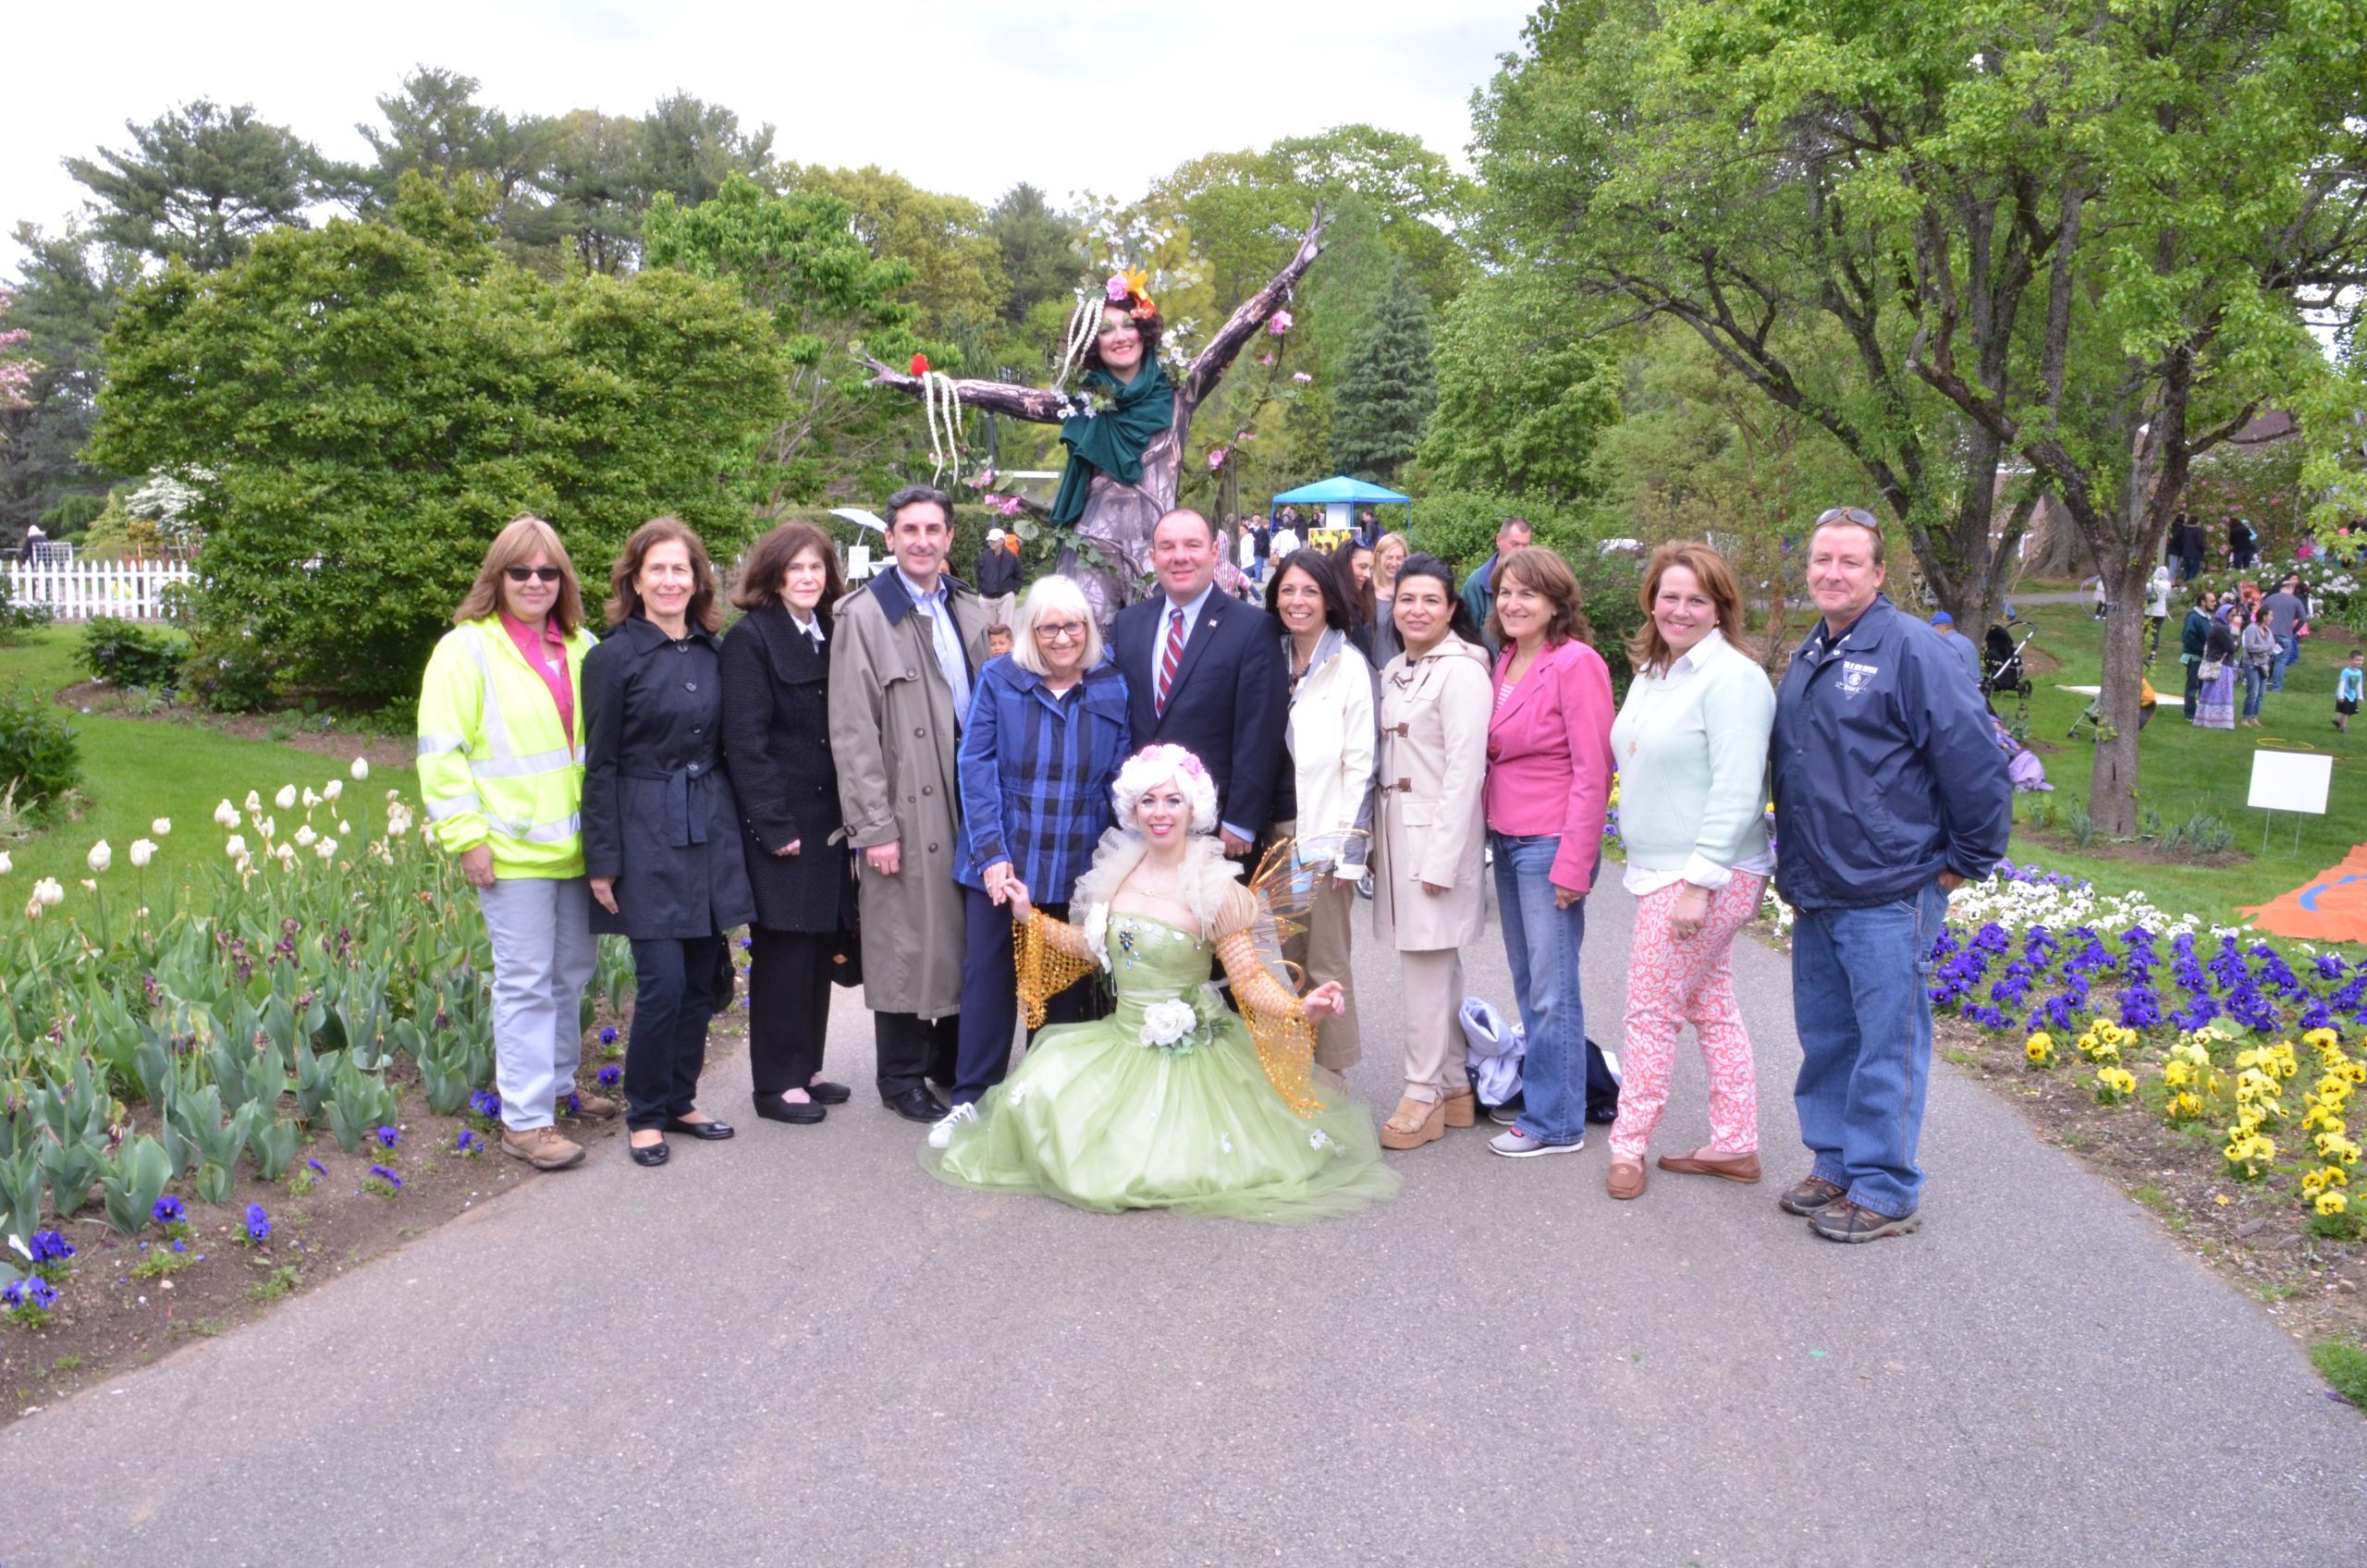 Fairies from the National Circus Project at the Clark Garden Spring Festival pose with local officials. (Photo courtesy of the Town of North Hempstead)